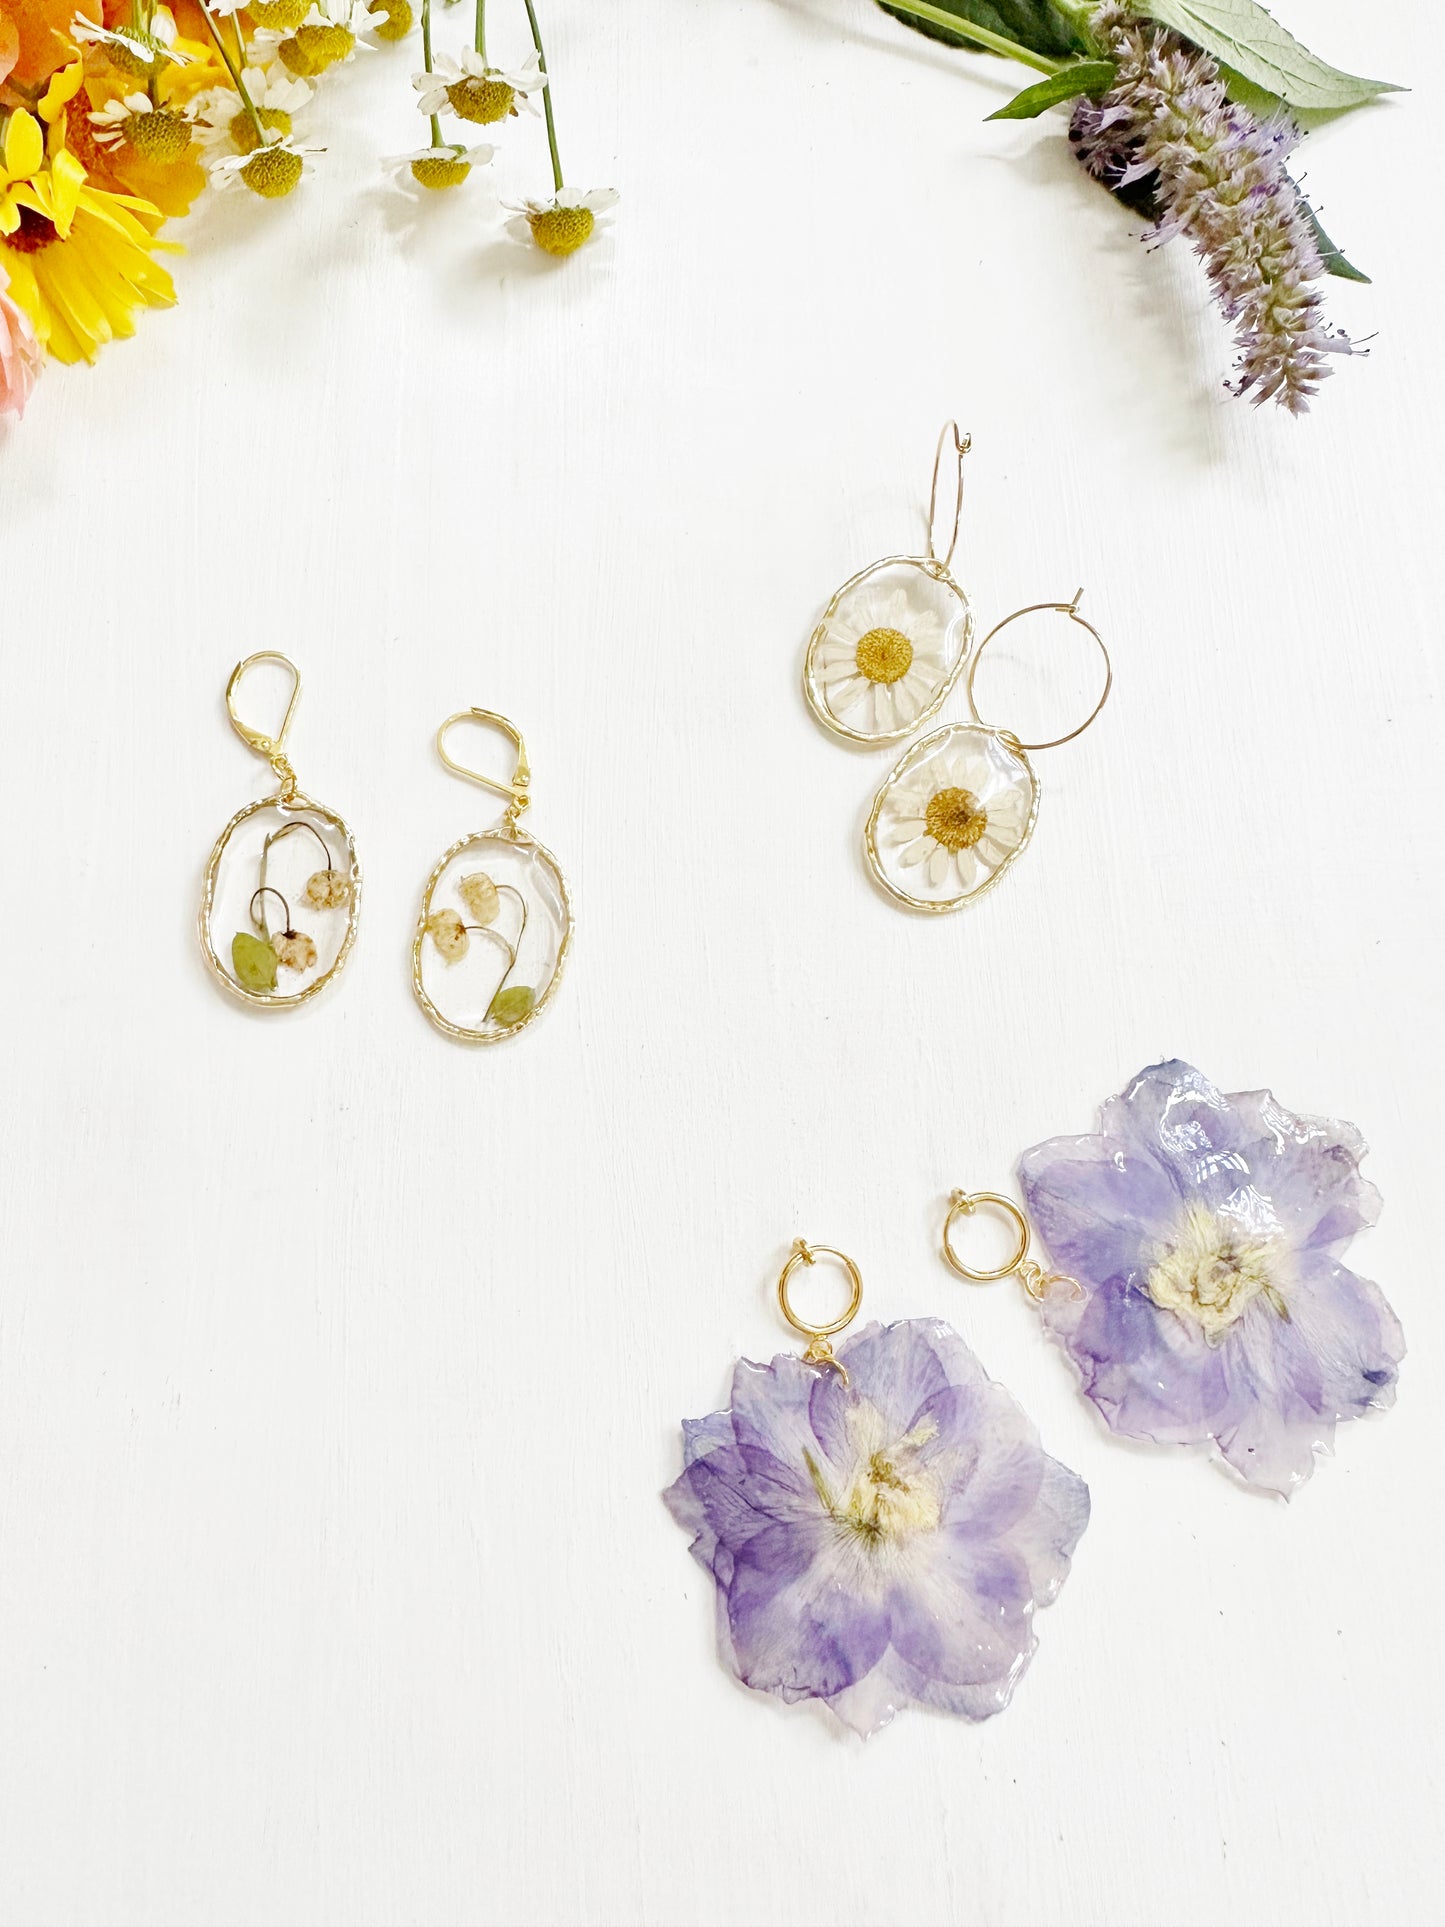 Lily-of-the-Valley Earrings in Golden Frame